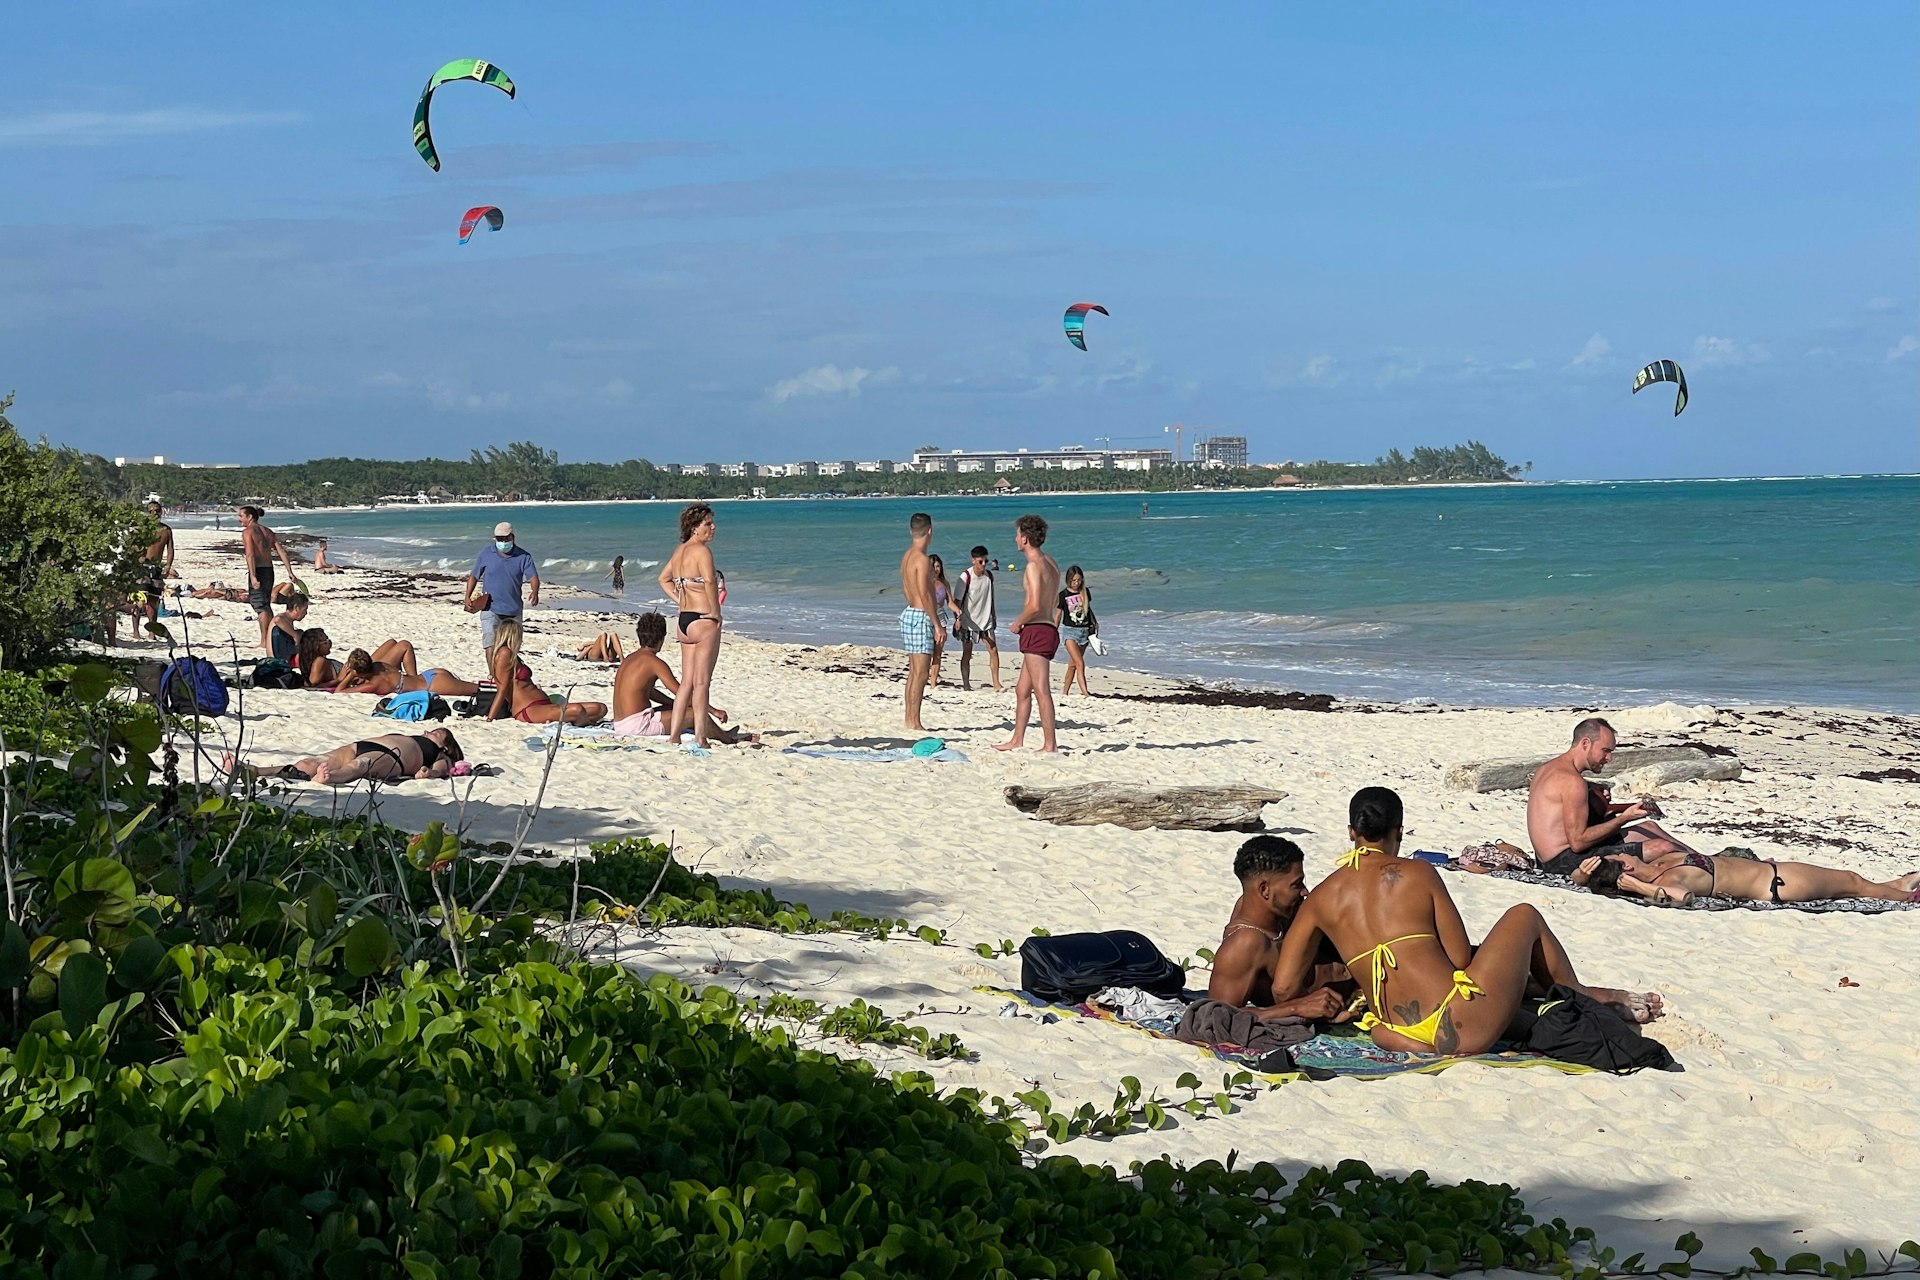 Visitors enjoy the white sands and blue waters at Punta Esmeralda in Playa del Carmen, Quintana Roo, Mexico